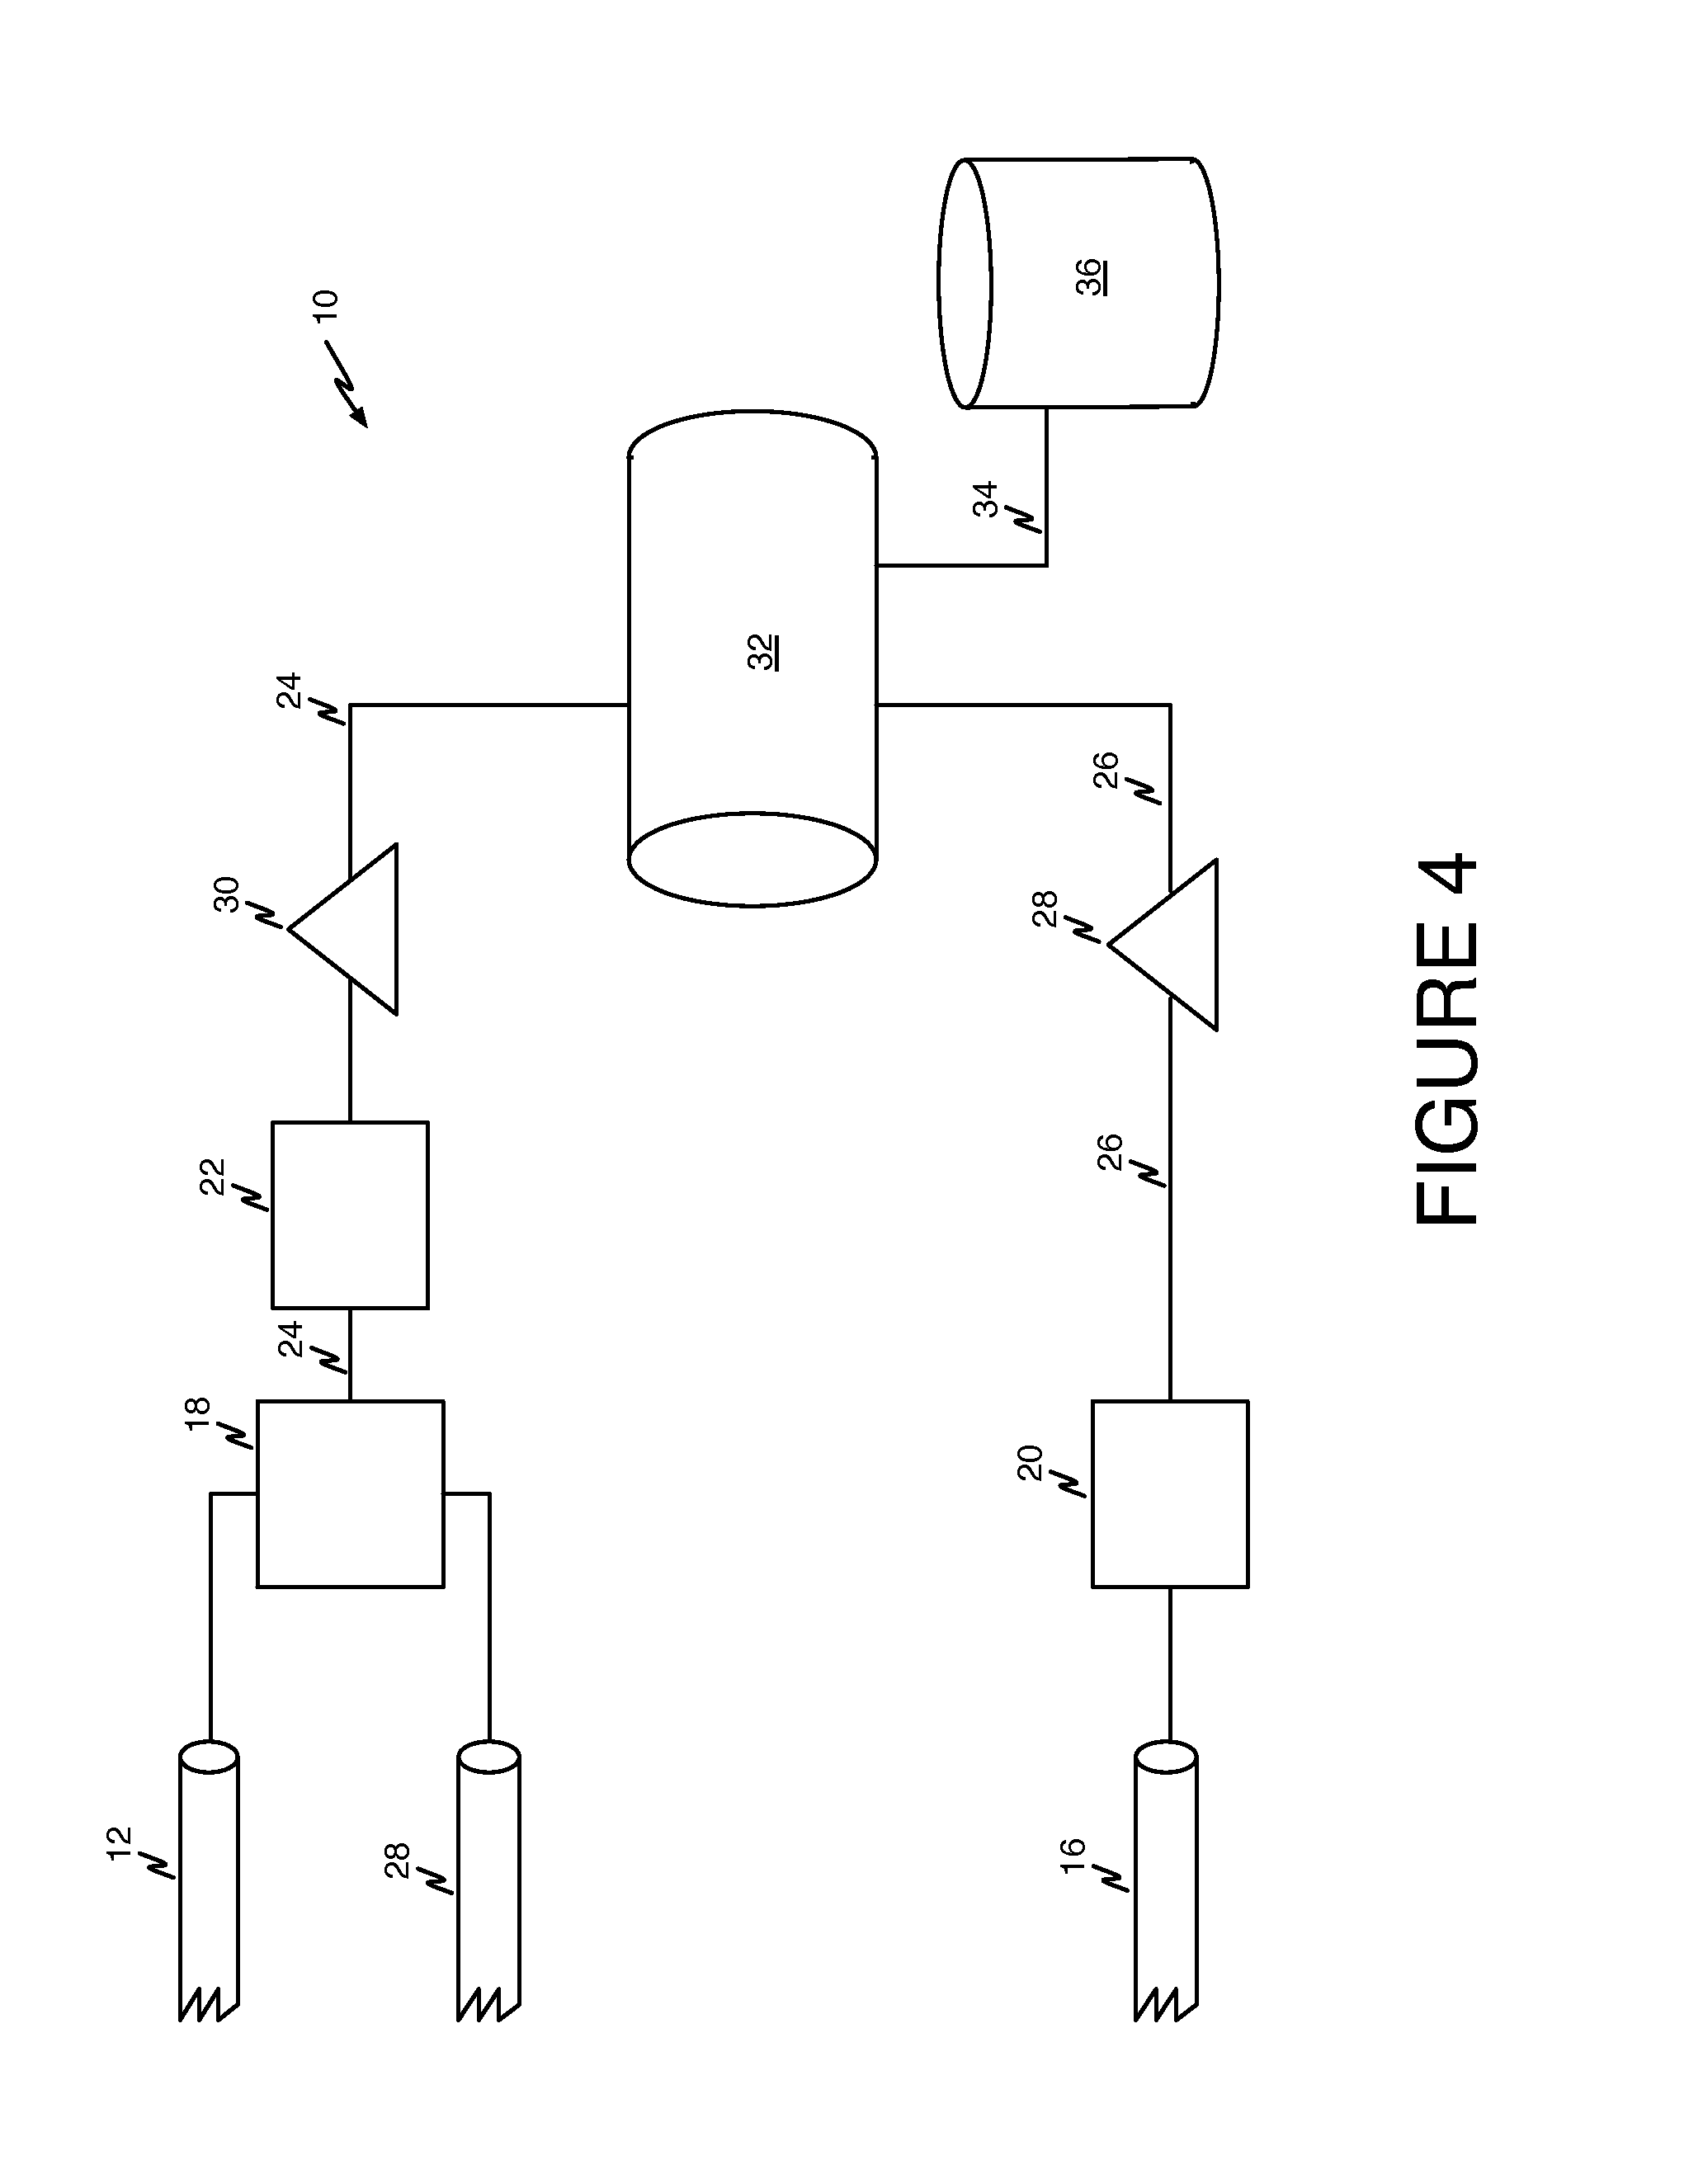 Mixing apparatus and method for manufacturing an emulsified fuel